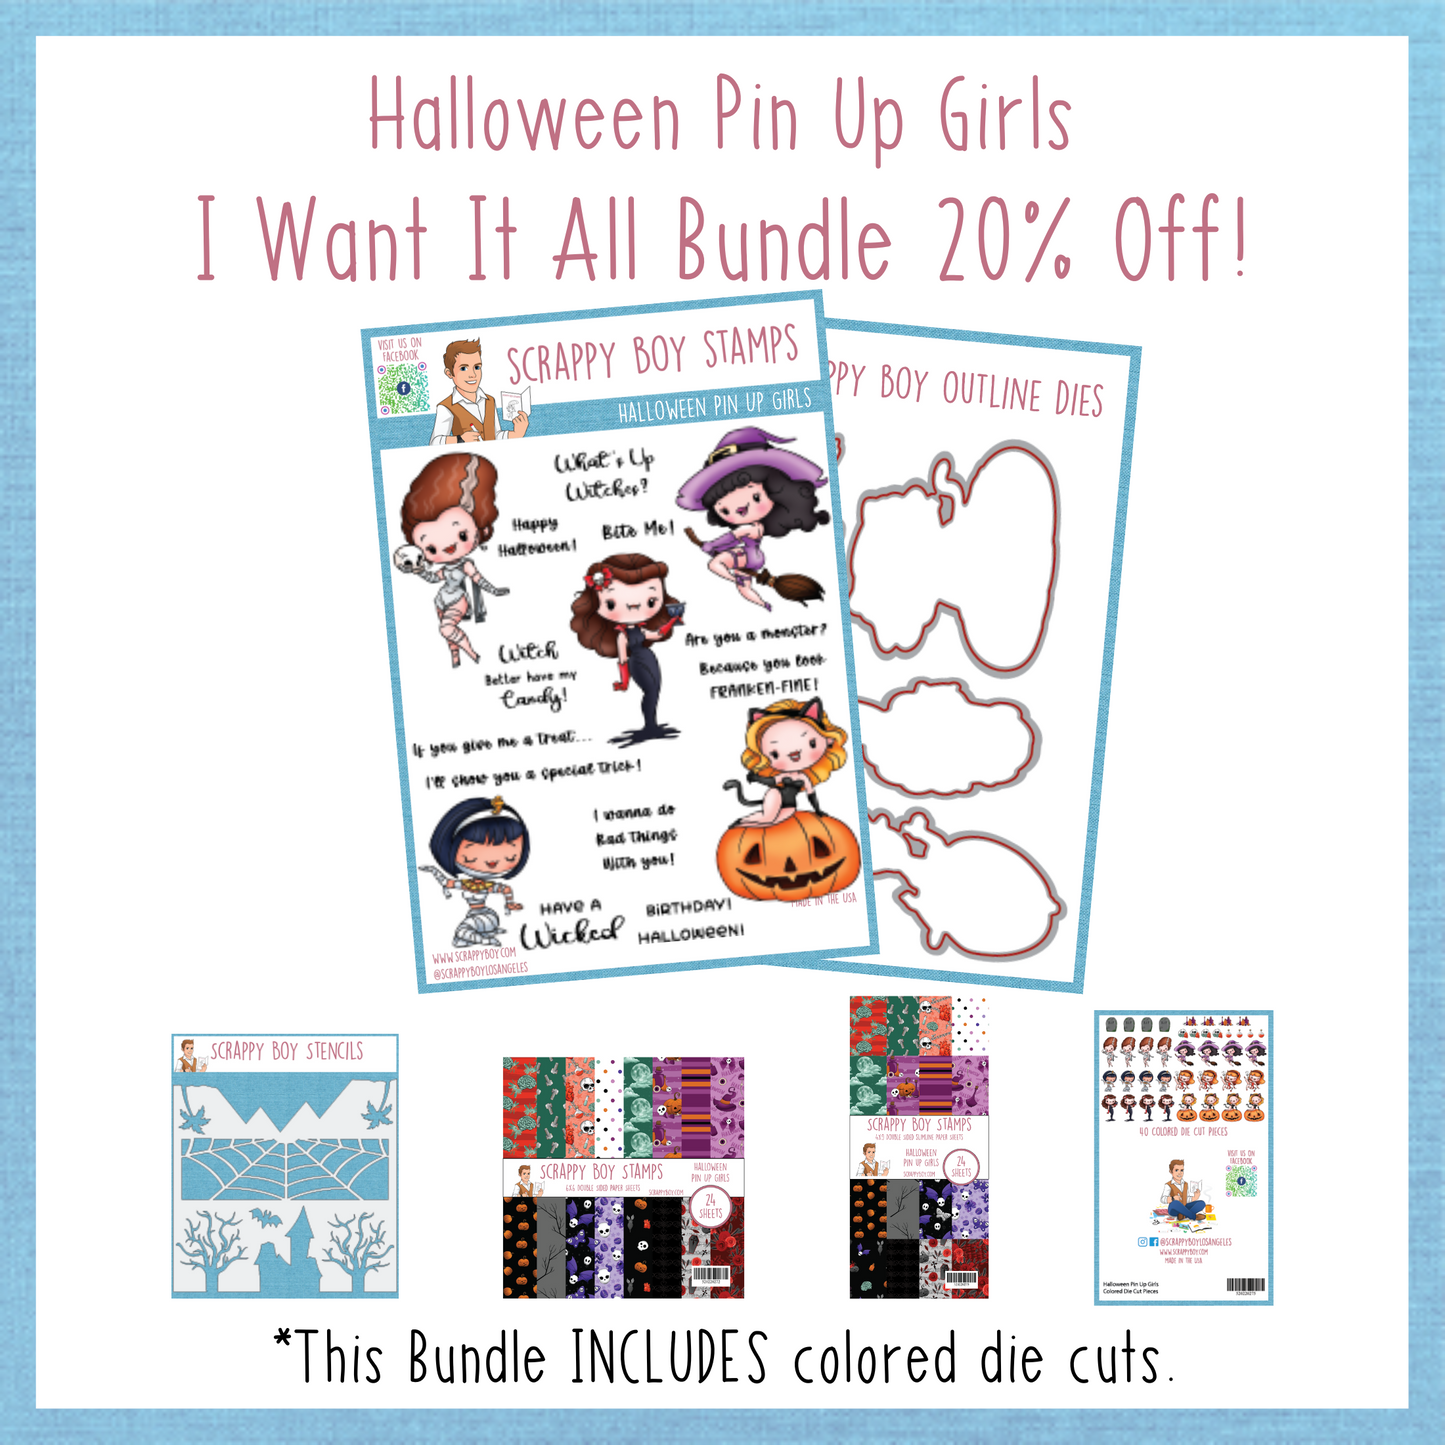 I Want It All Bundle - Halloween Pin Up Girls Release Scrappy Boy Stamps